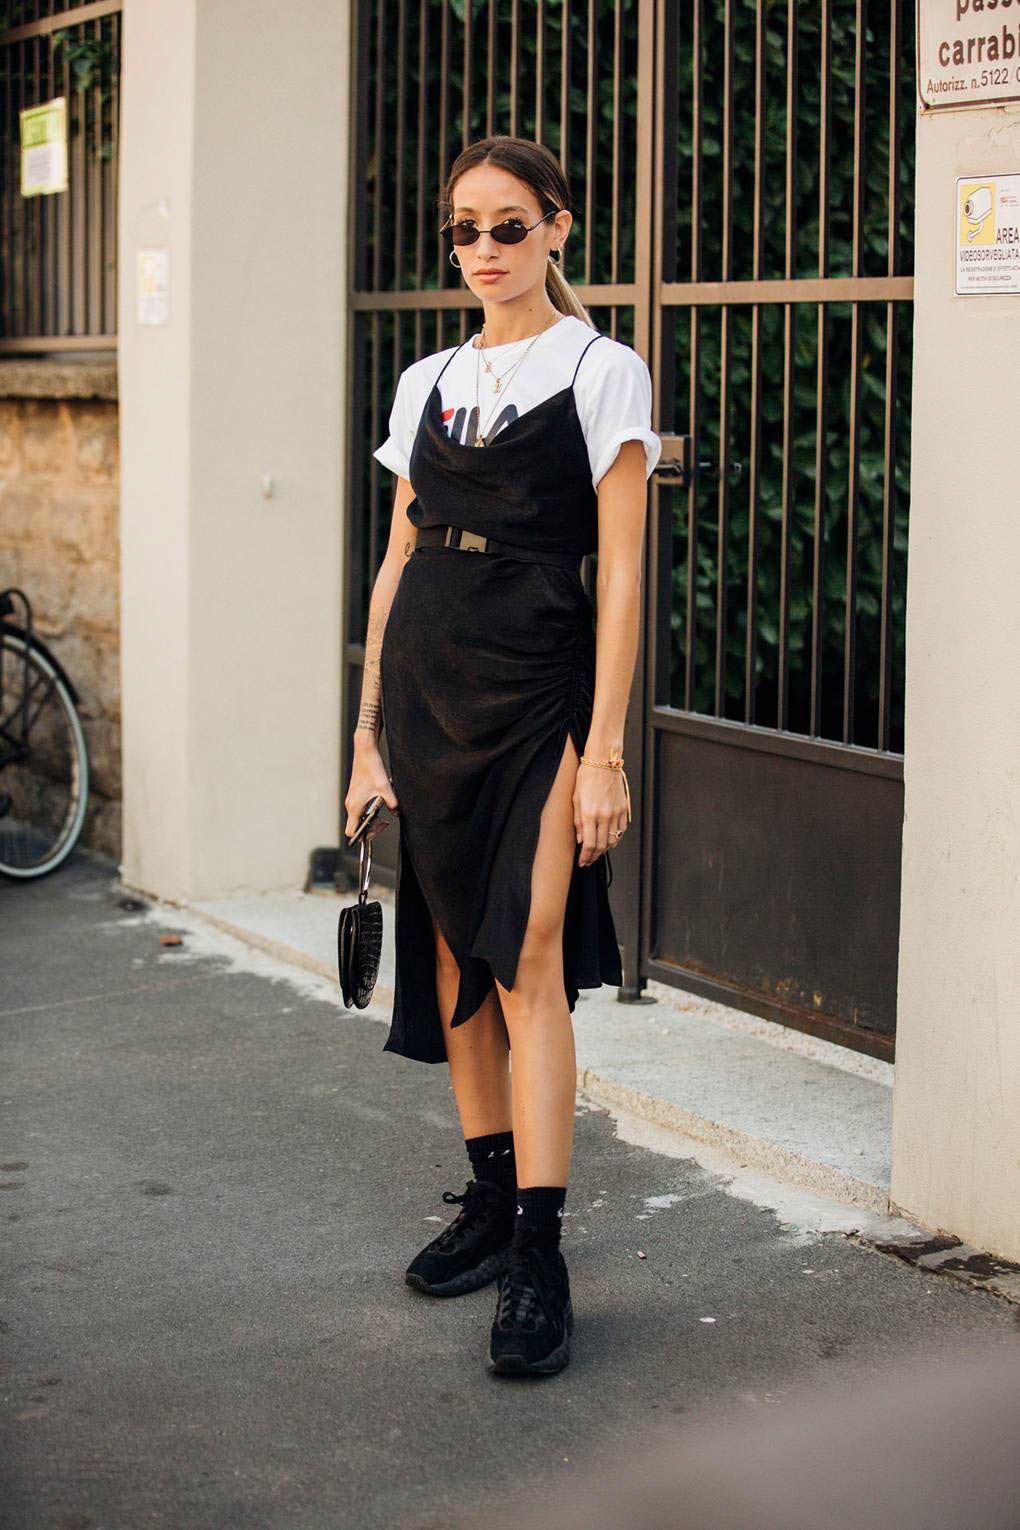 30+ Summer Street Style Looks to Copy Now